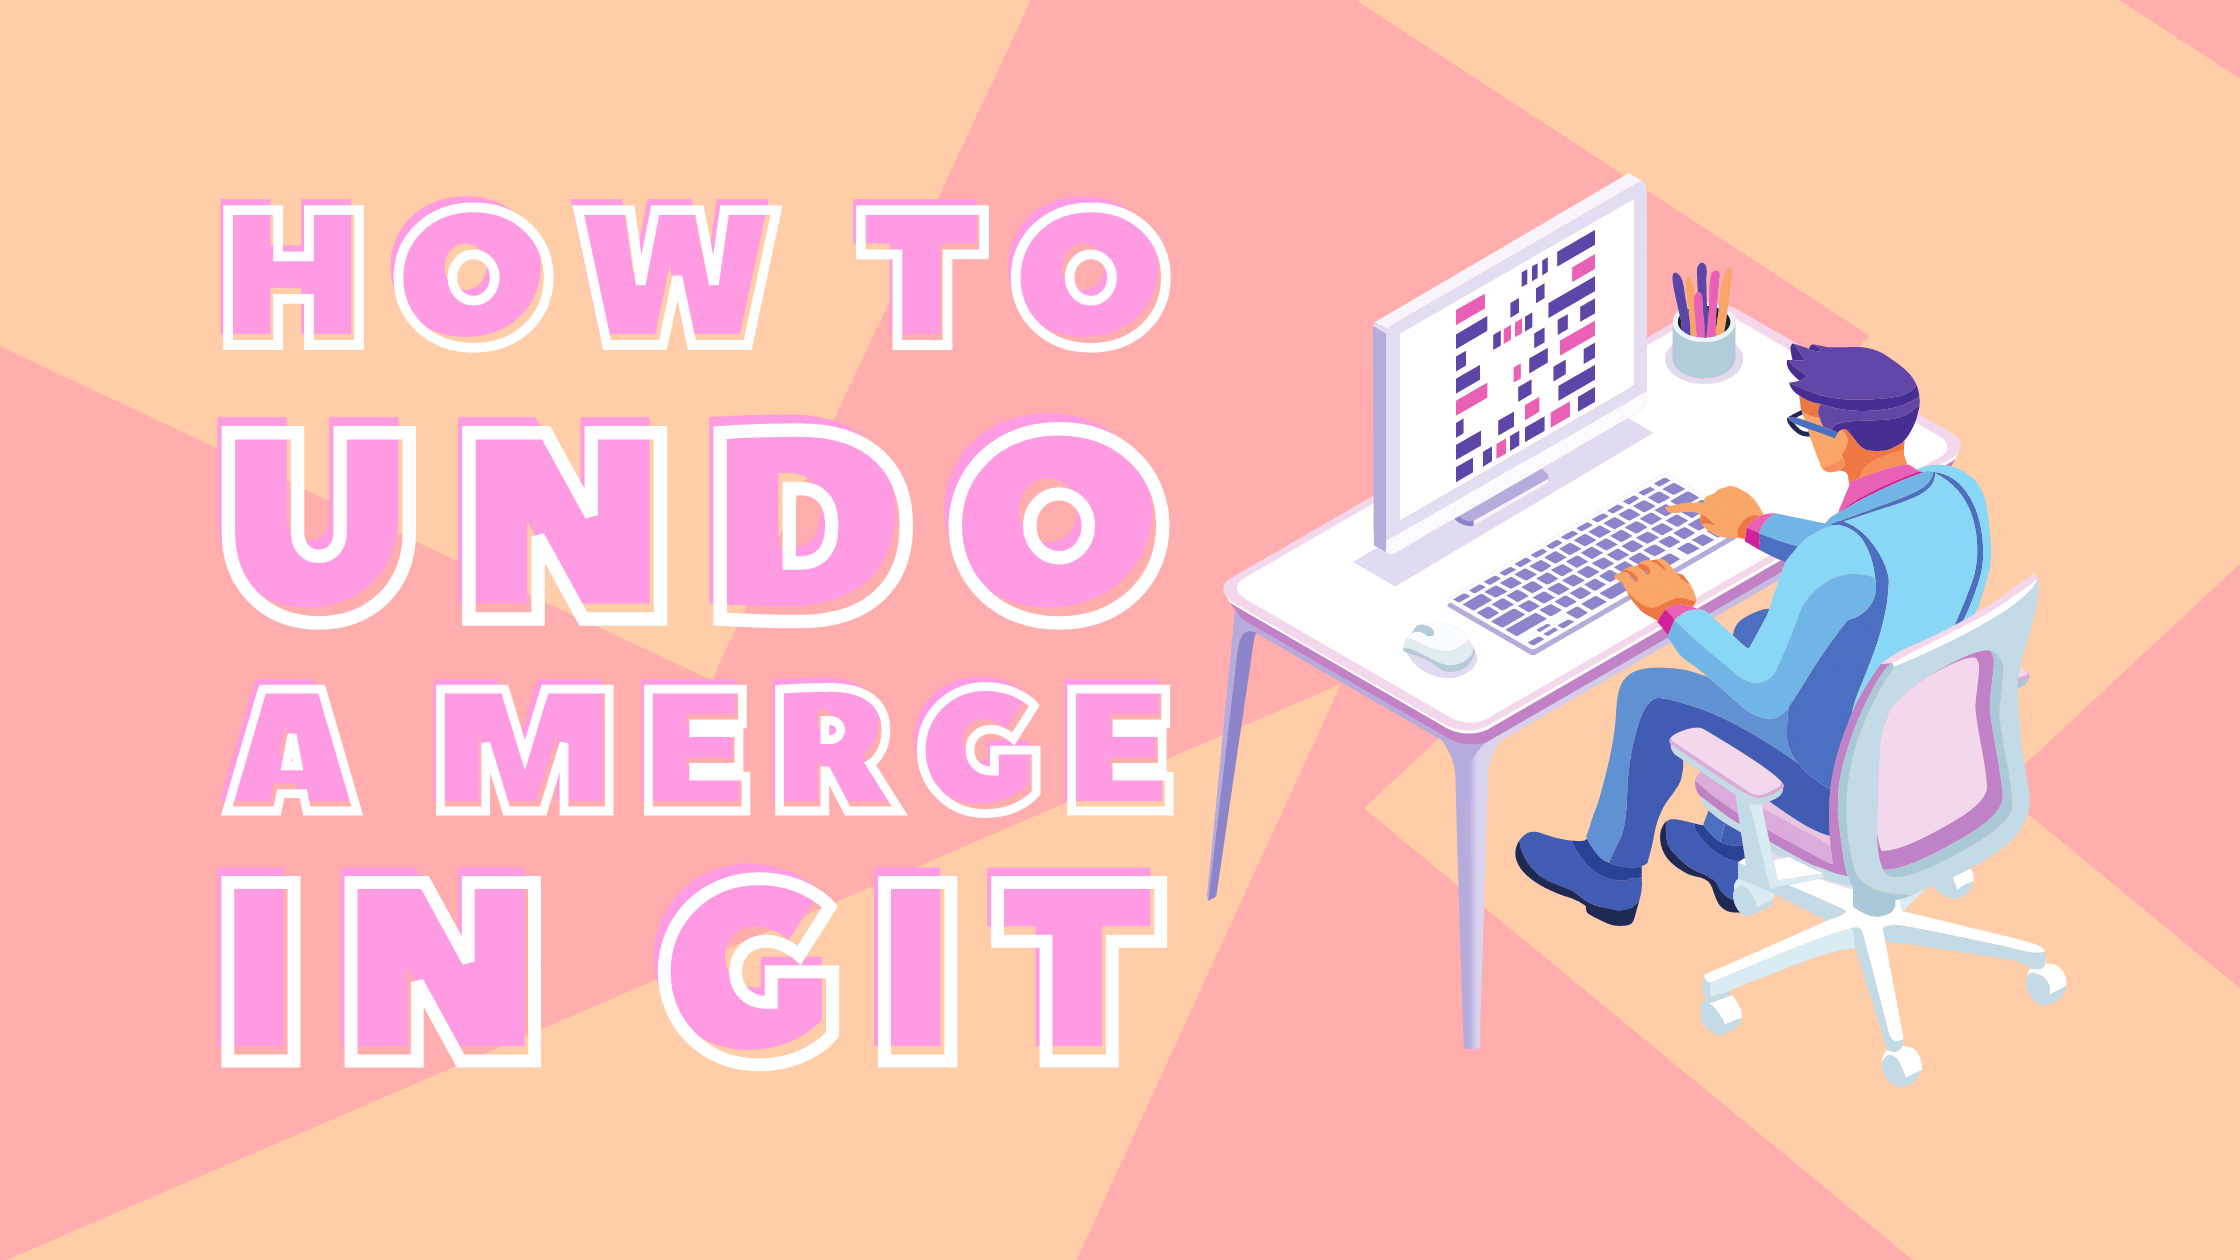 How to Undo a Merge in Git